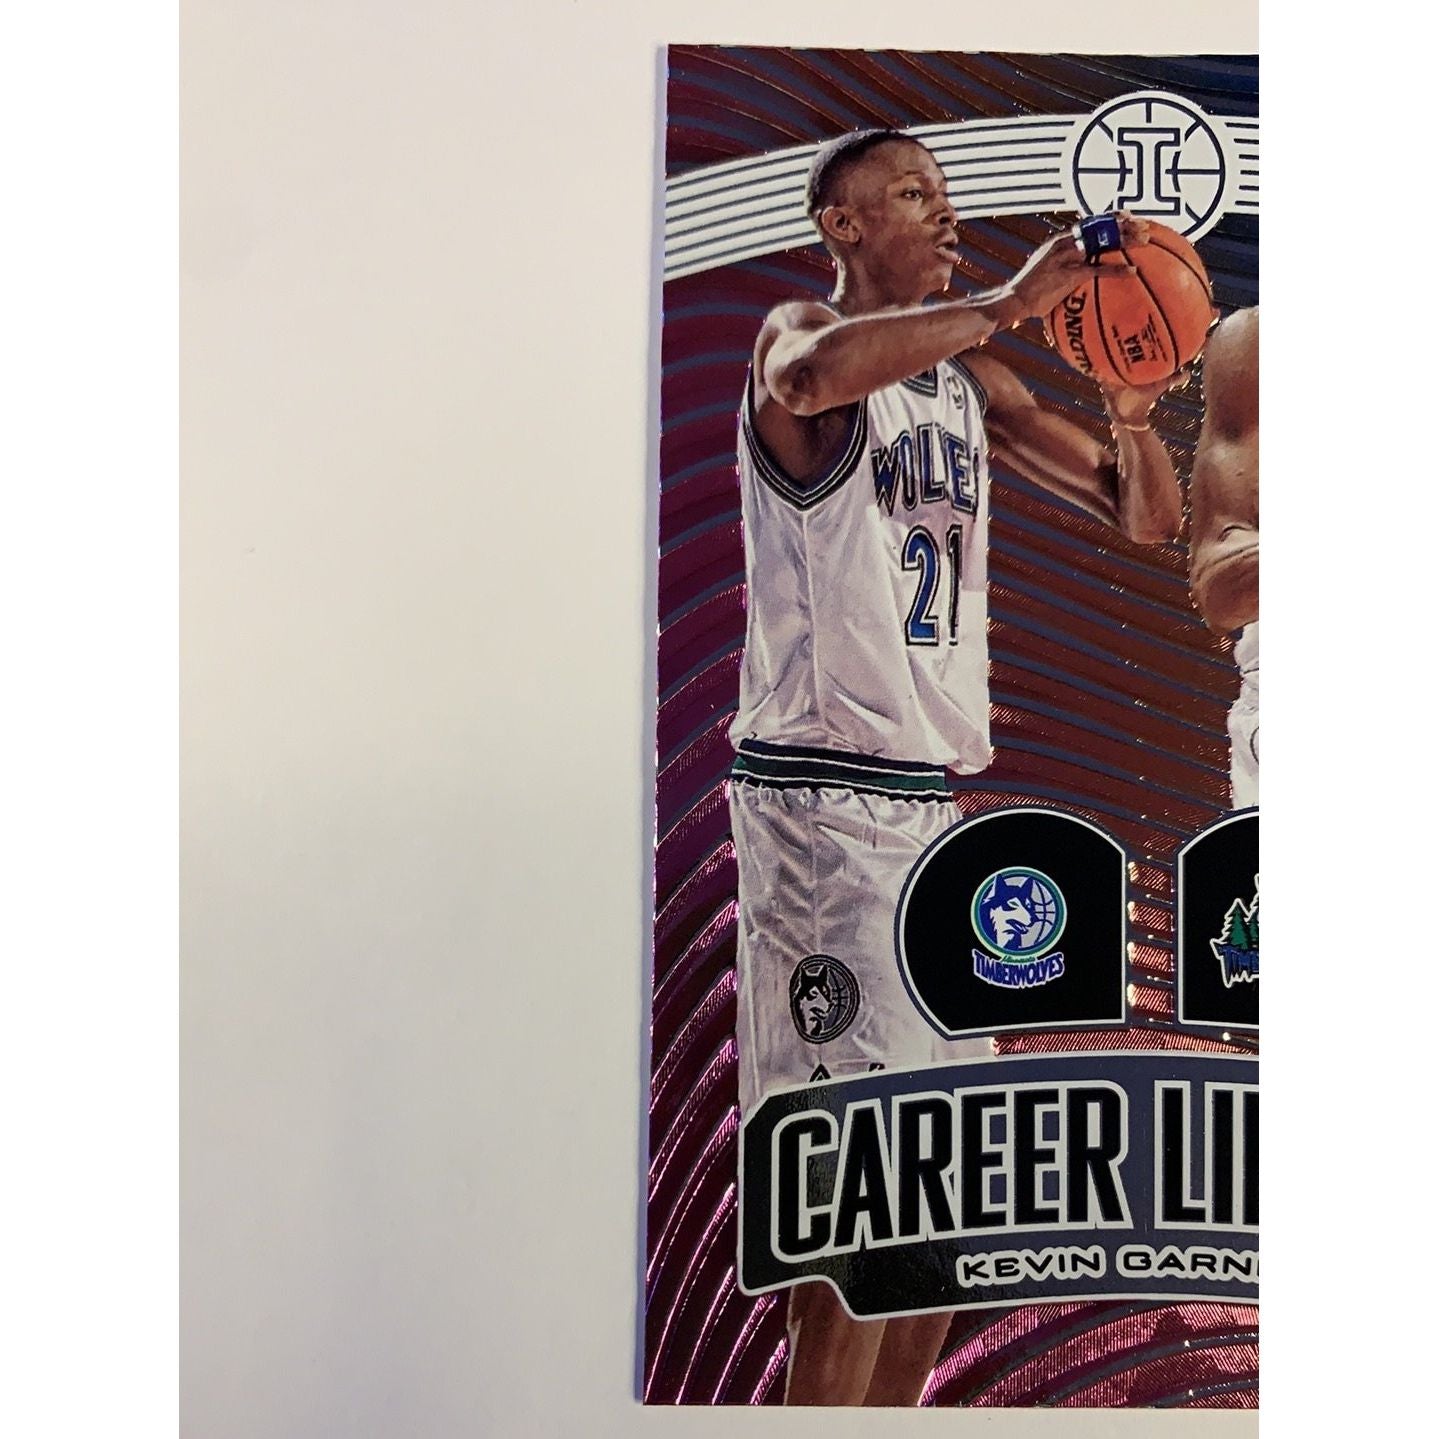  2919-20 Illusions Career Lineage Kevin Garnett  Local Legends Cards & Collectibles